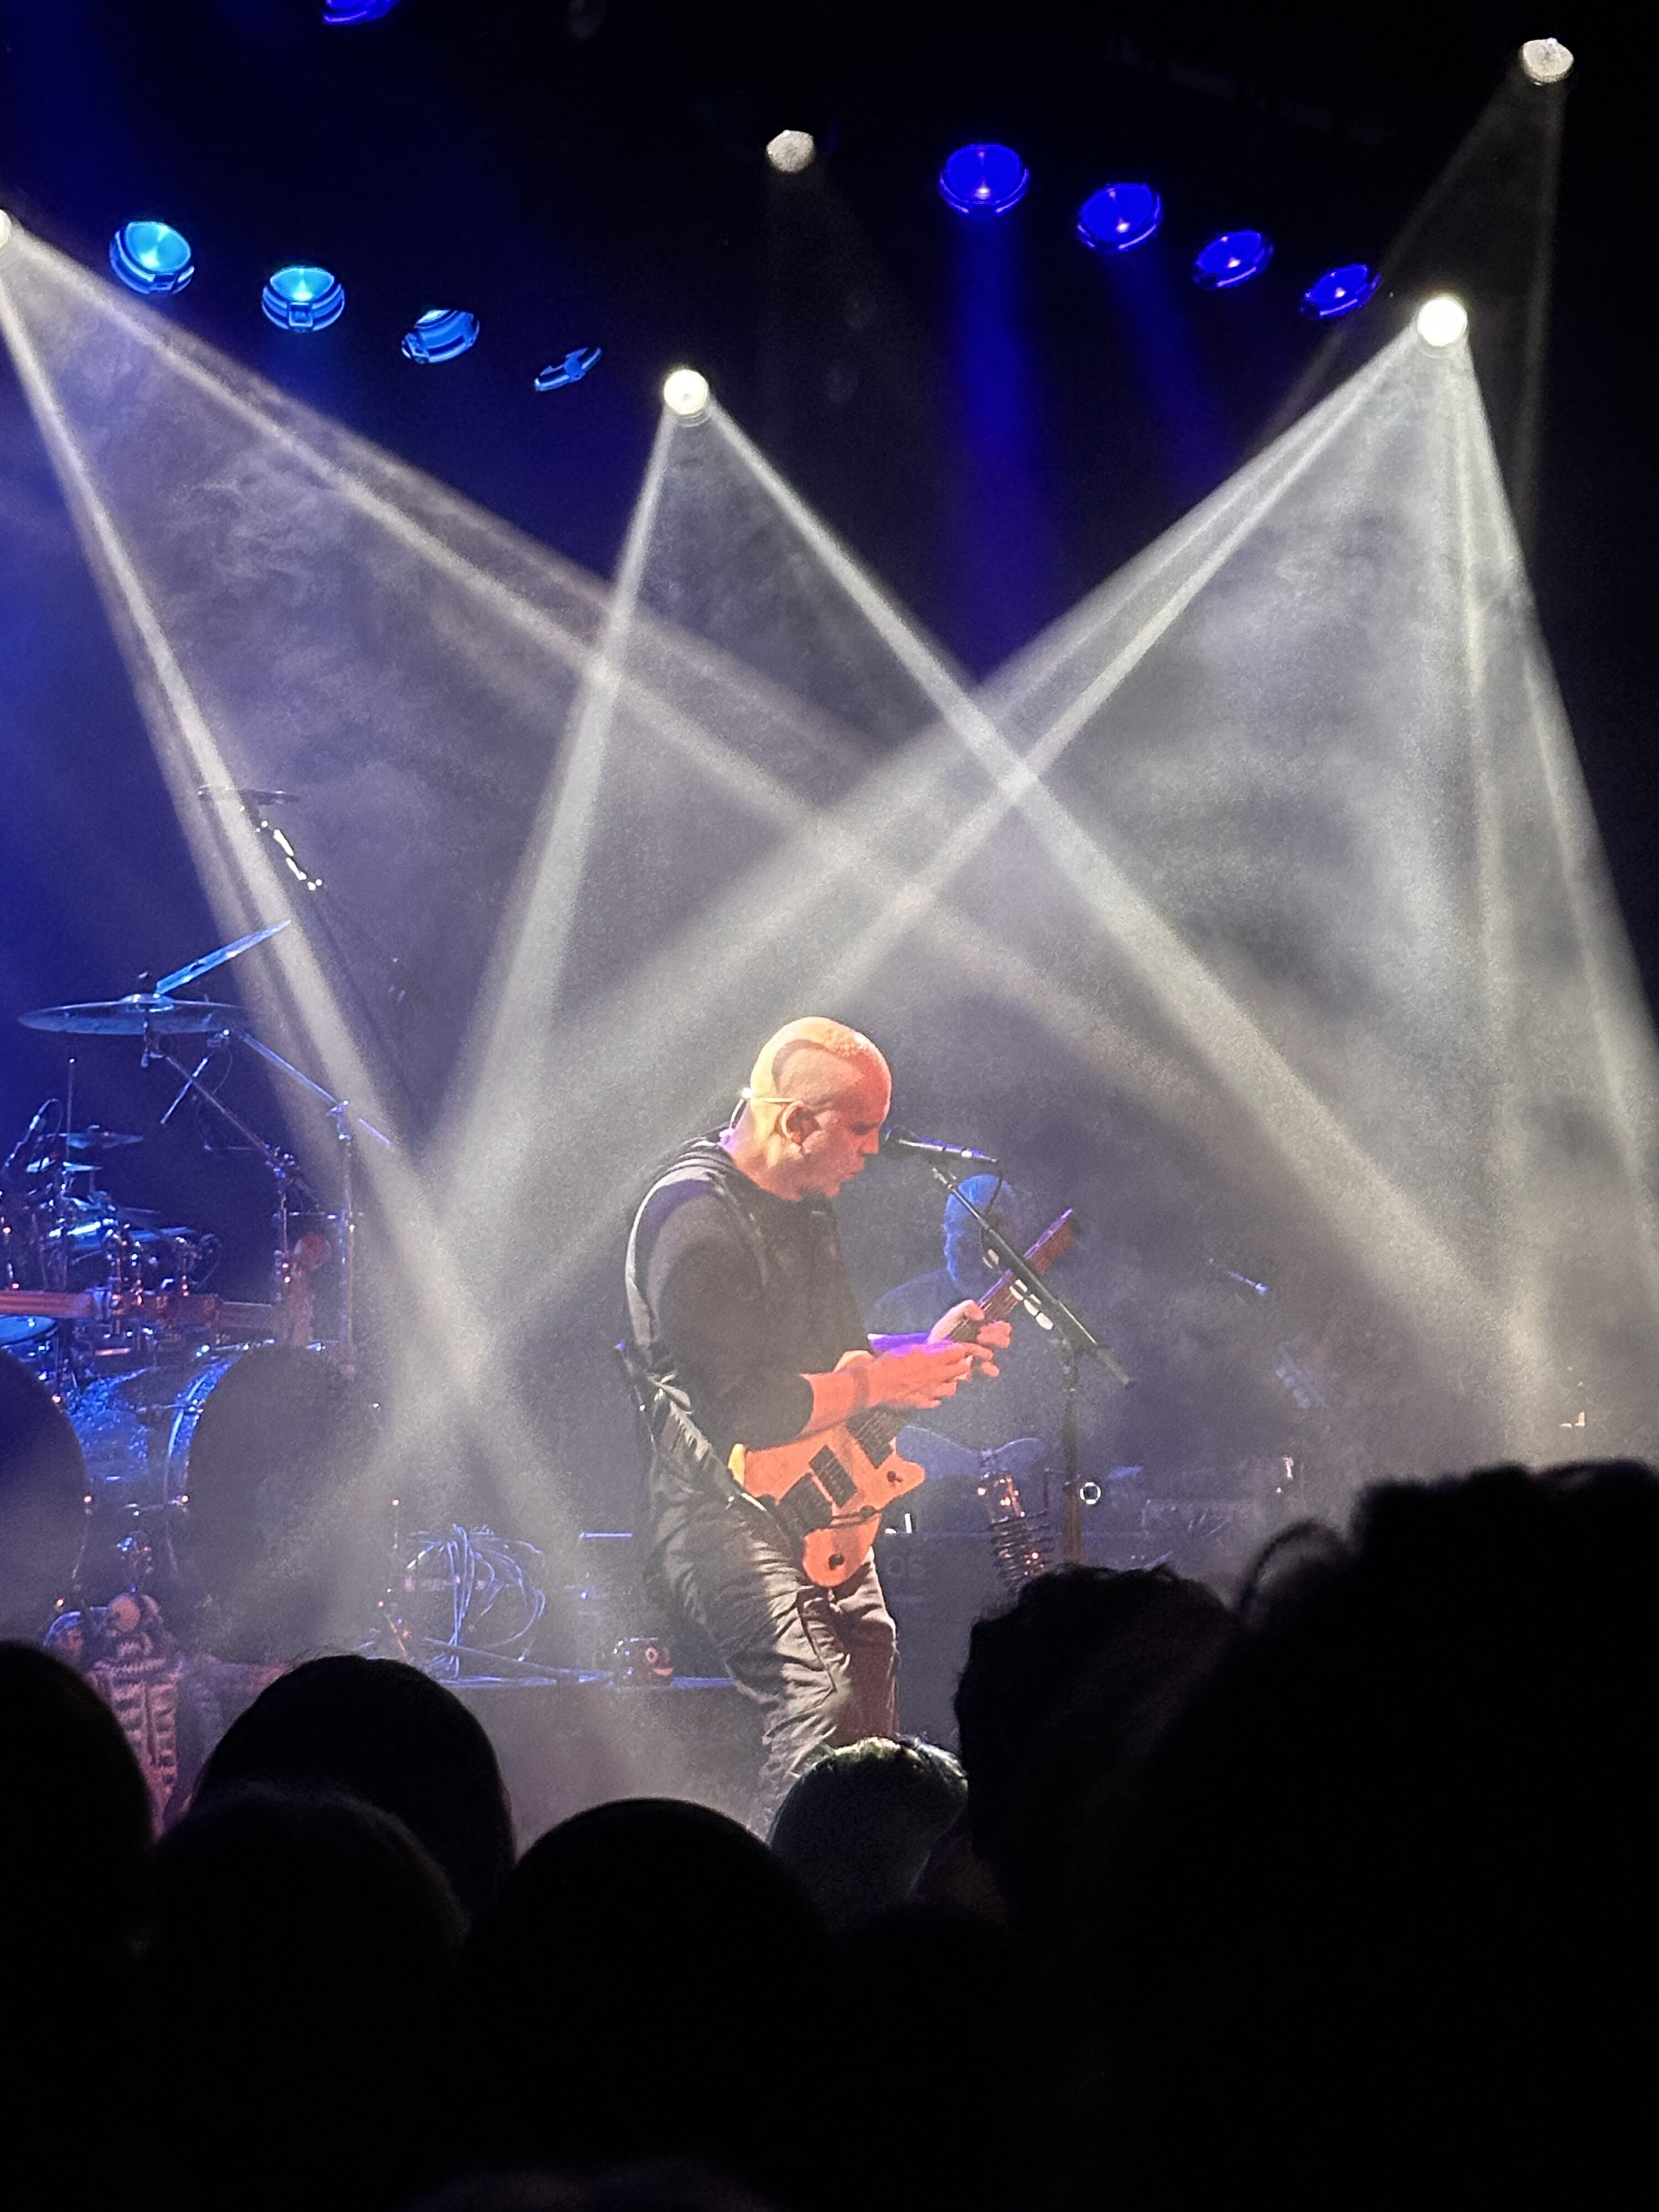 a man playing guitar on stage with spotlights